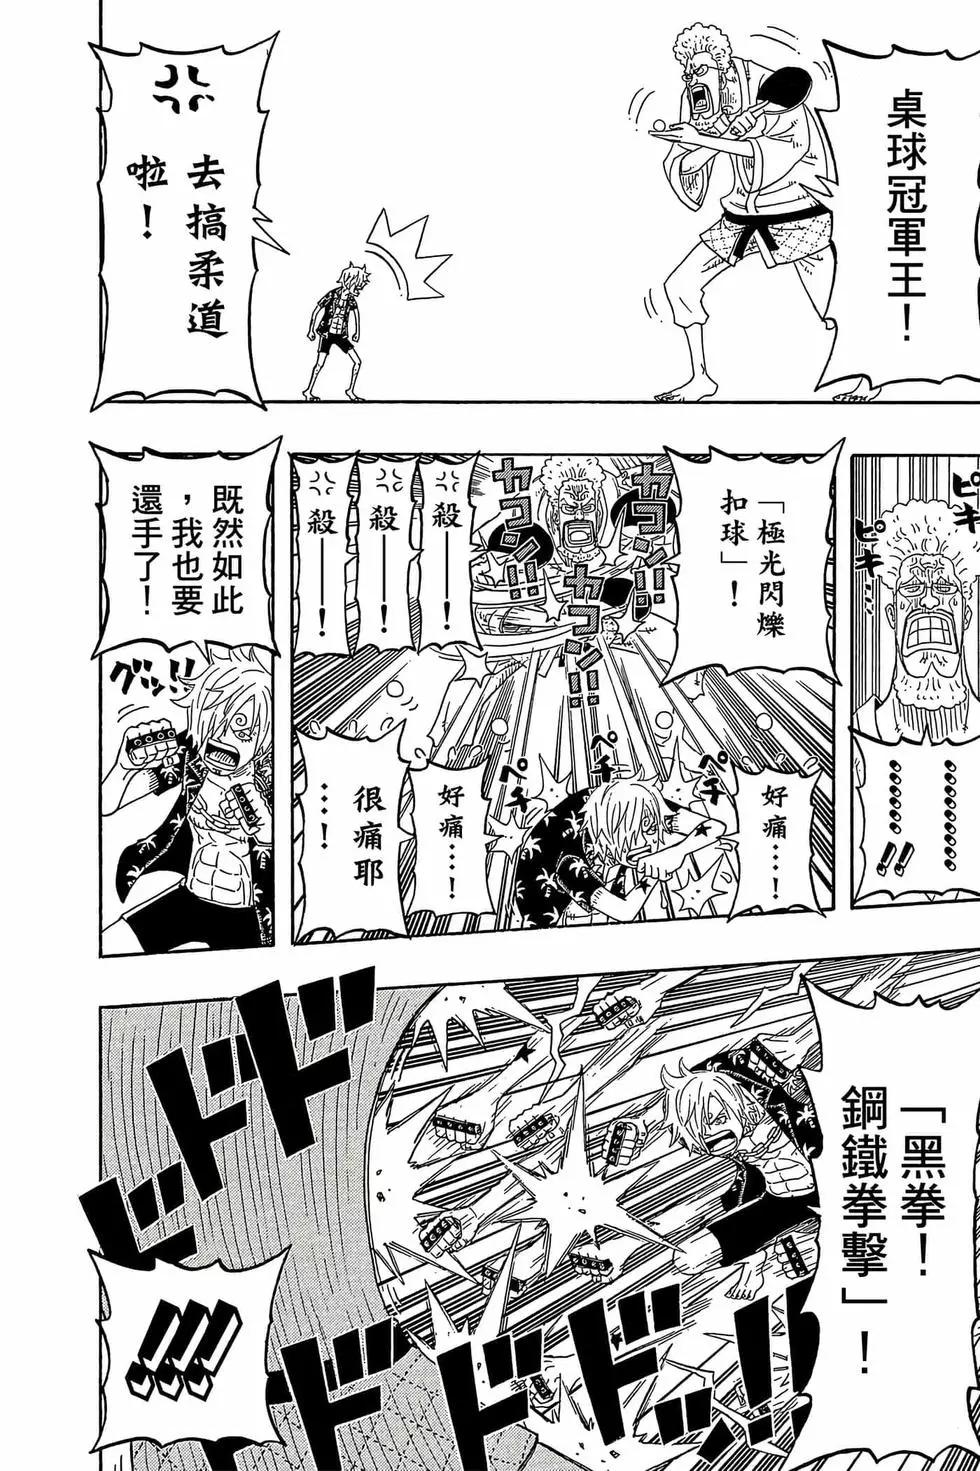 One piece party - 第03卷(4/4) - 3